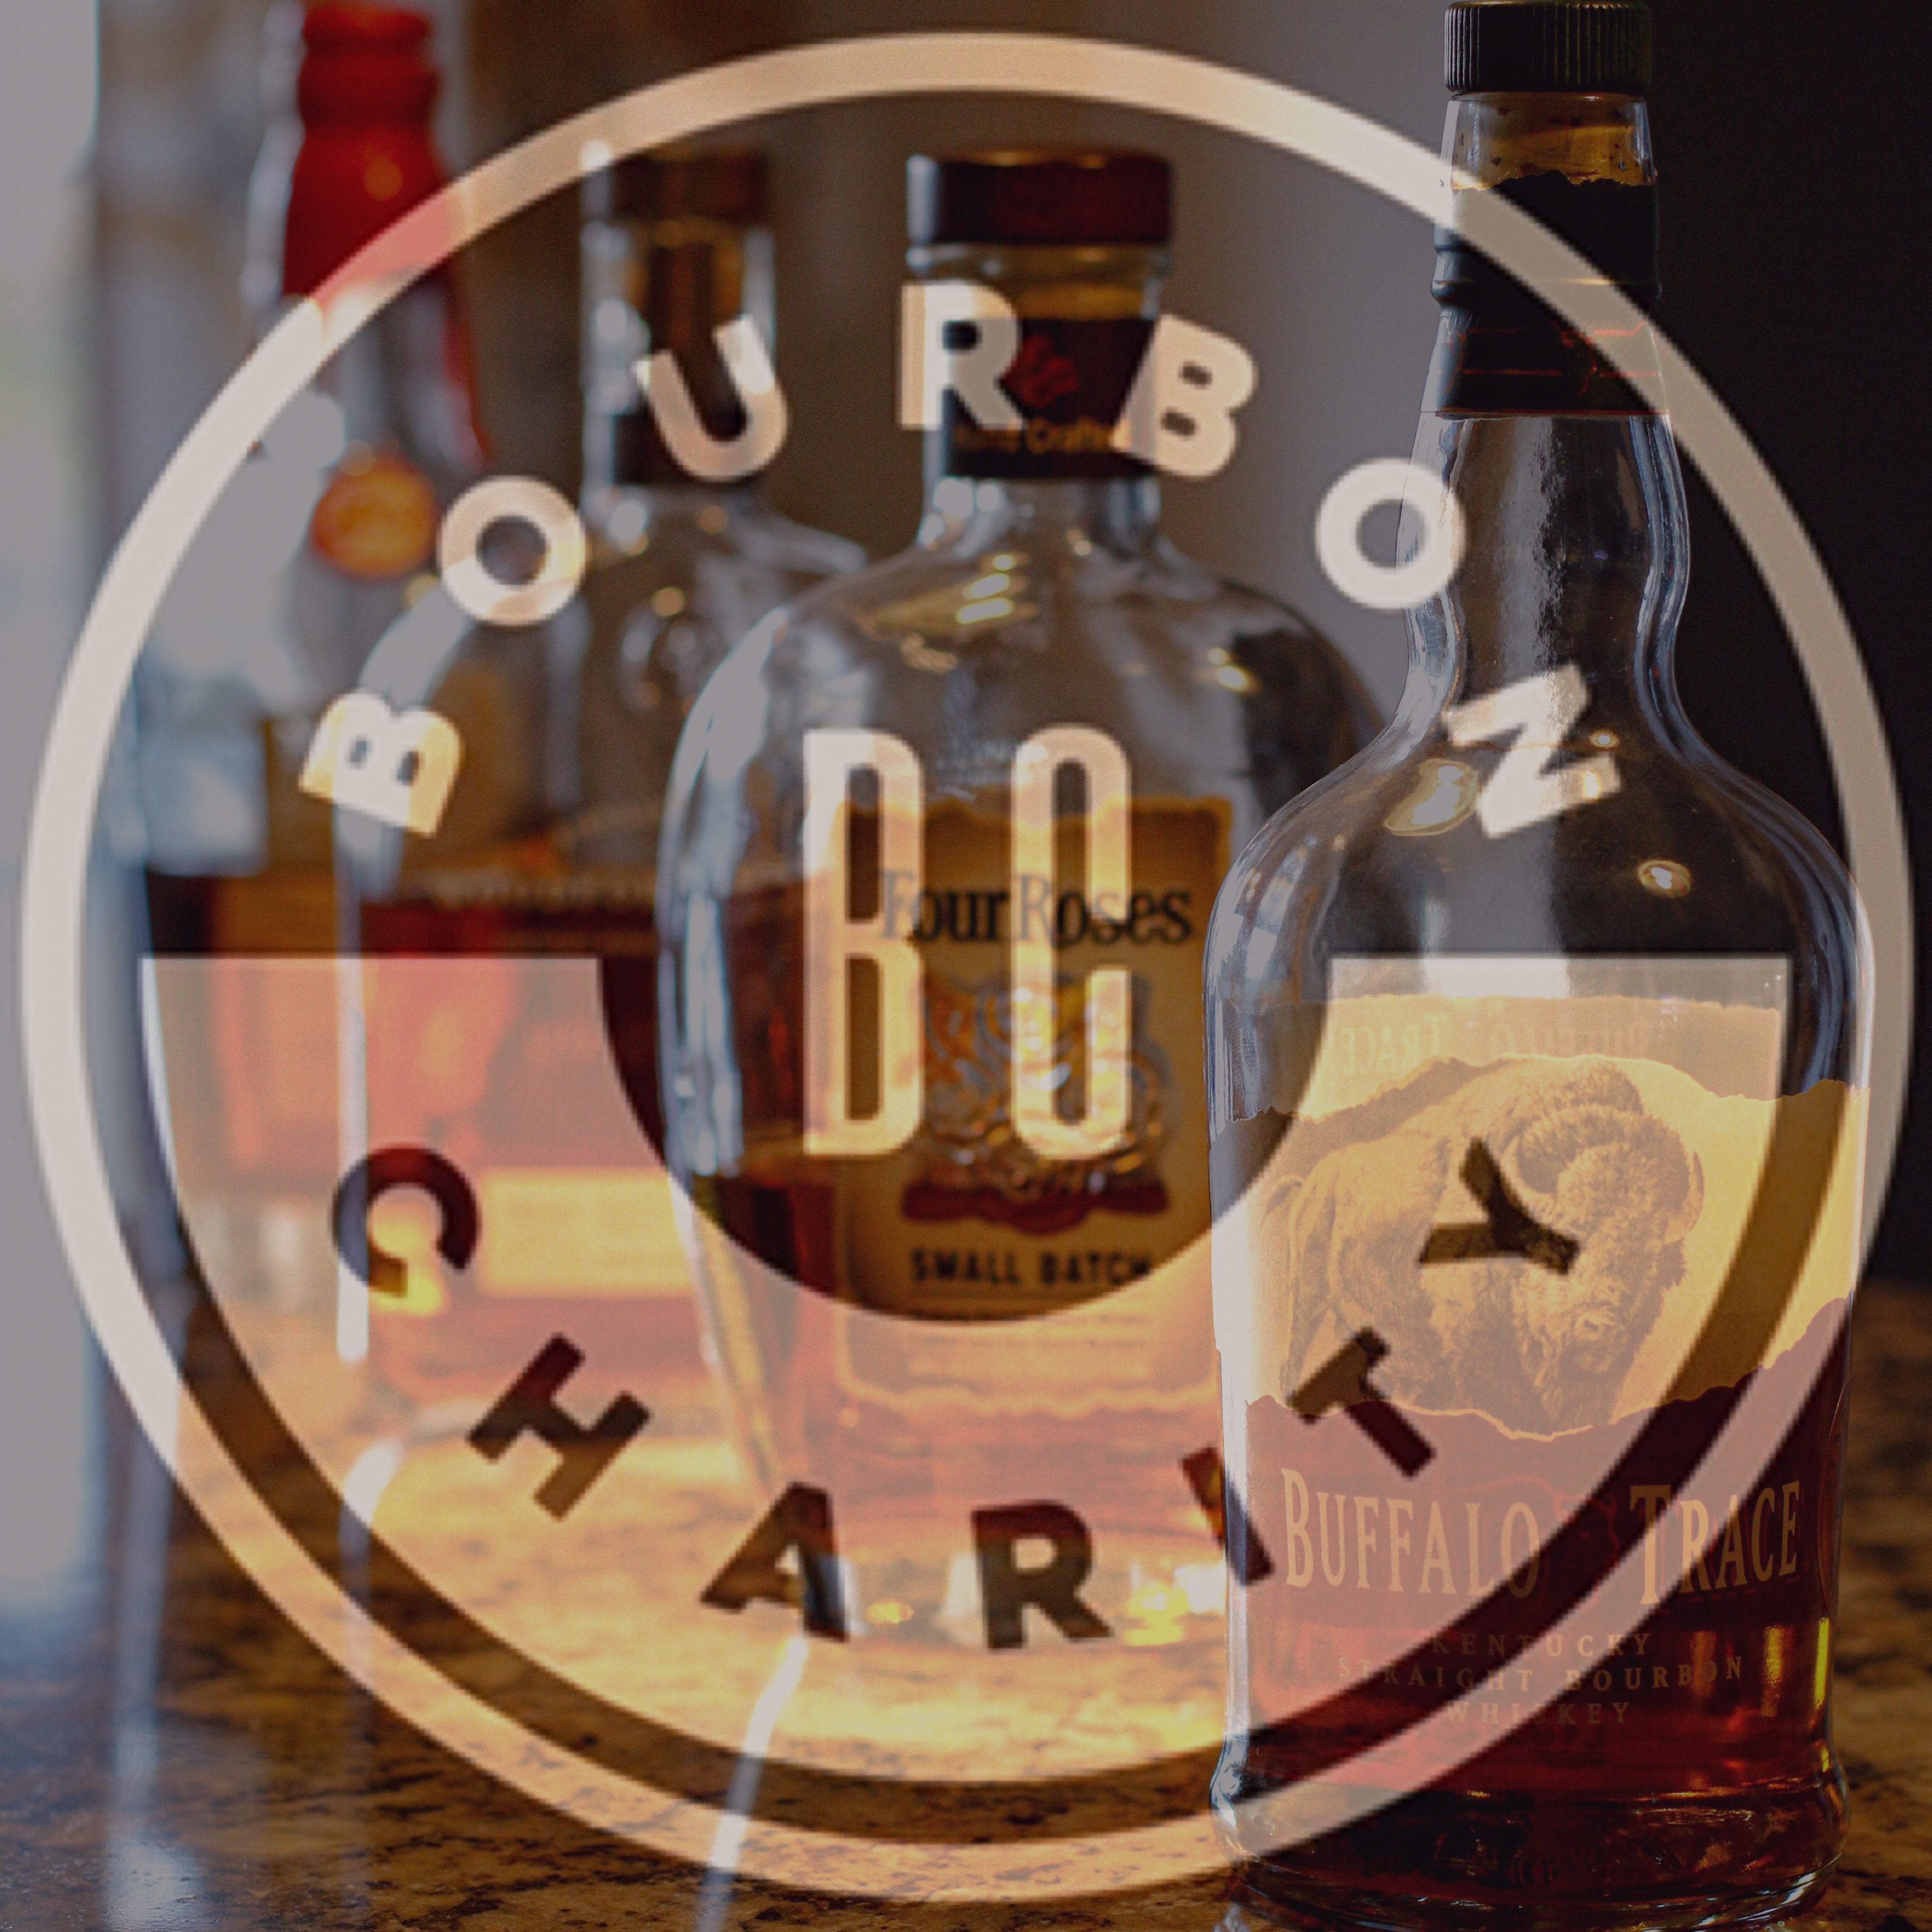 43: Drink Bourbon For A Change